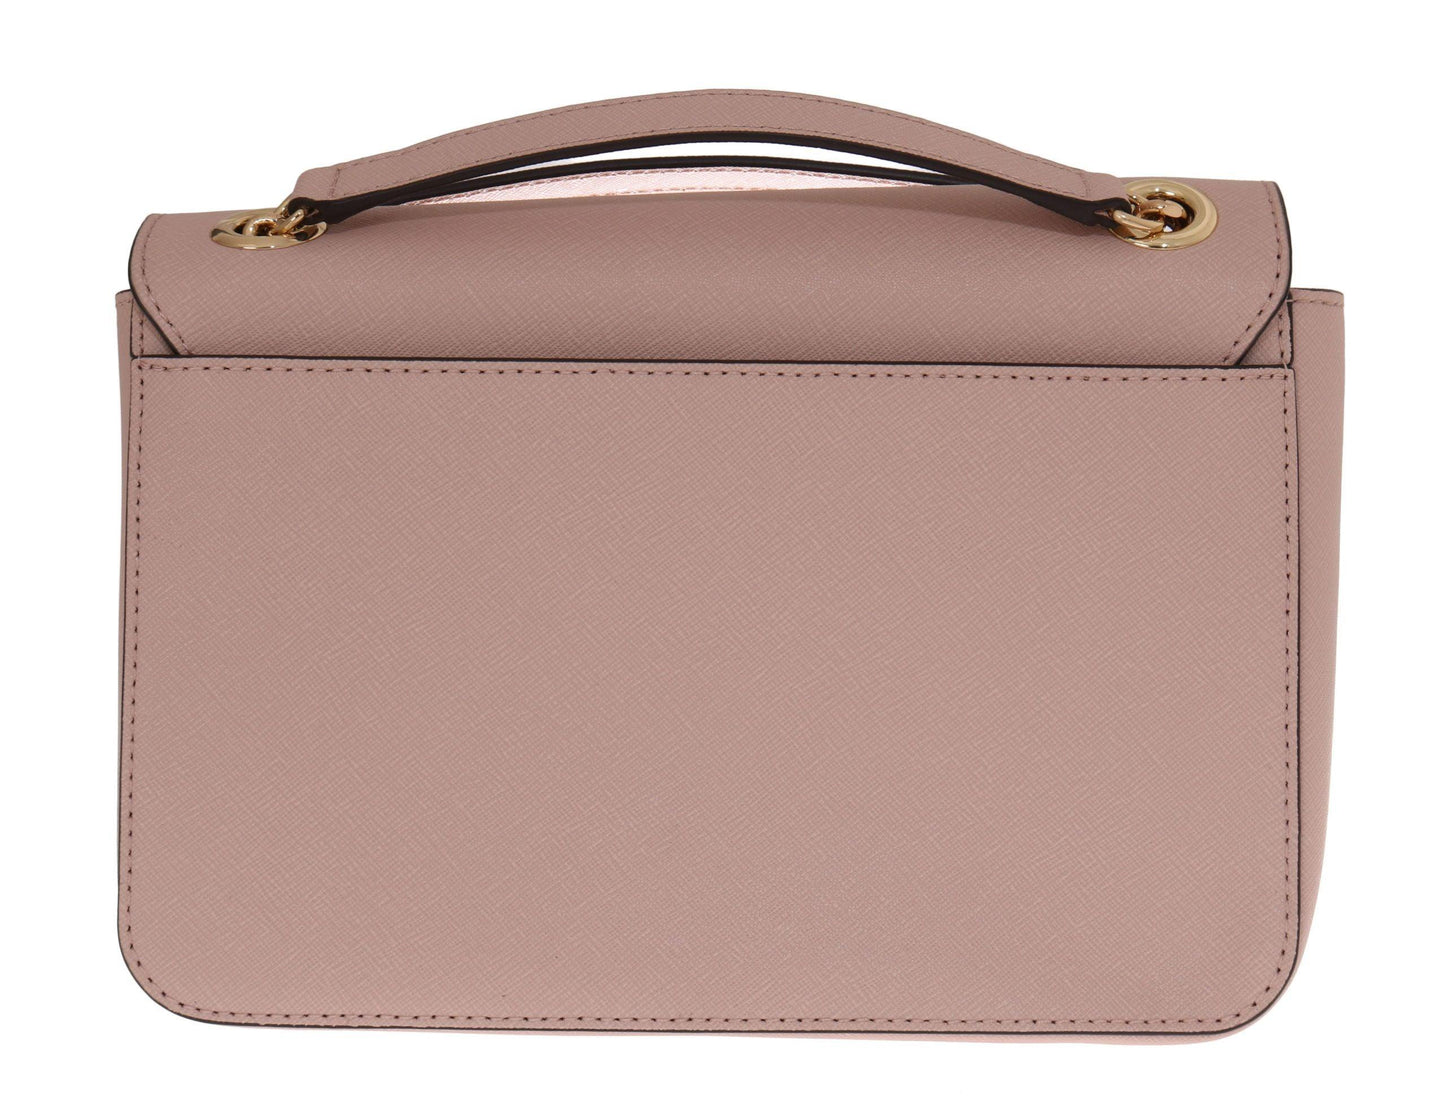 Michael Kors Pink Tina Leather Shoulder Bag designed by Michael Kors available from Moon Behind The Hill 's Handbags, Wallets & Cases > Handbags > Womens range